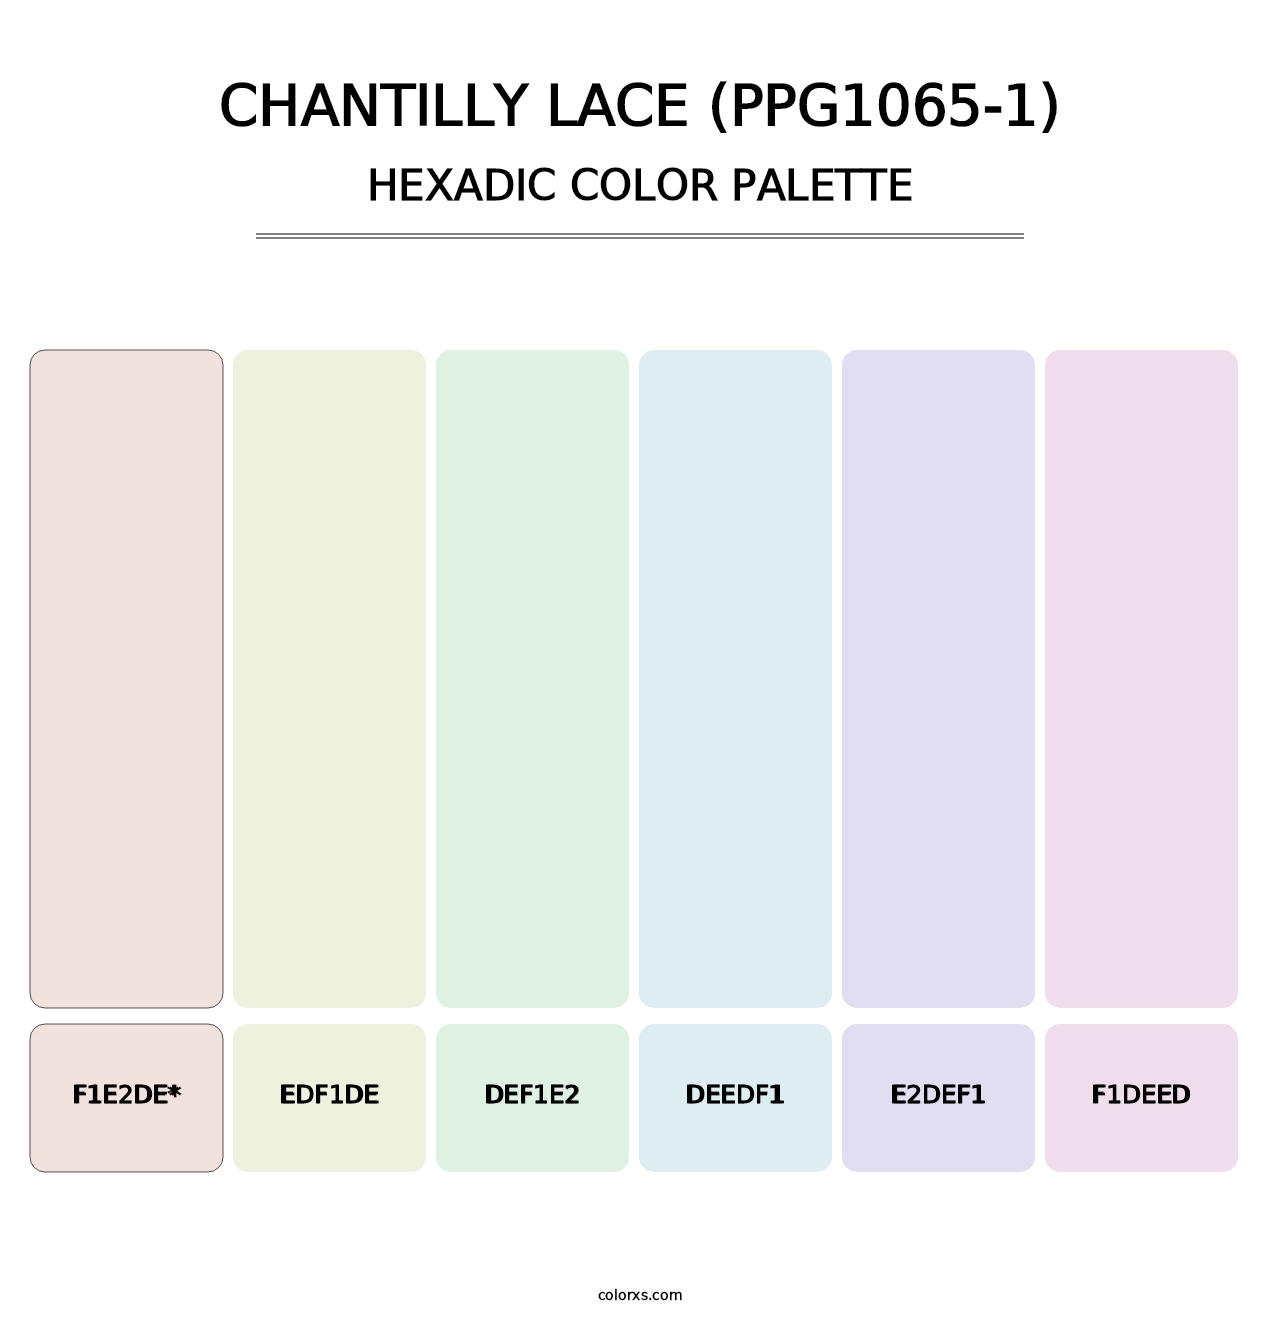 Chantilly Lace (PPG1065-1) - Hexadic Color Palette